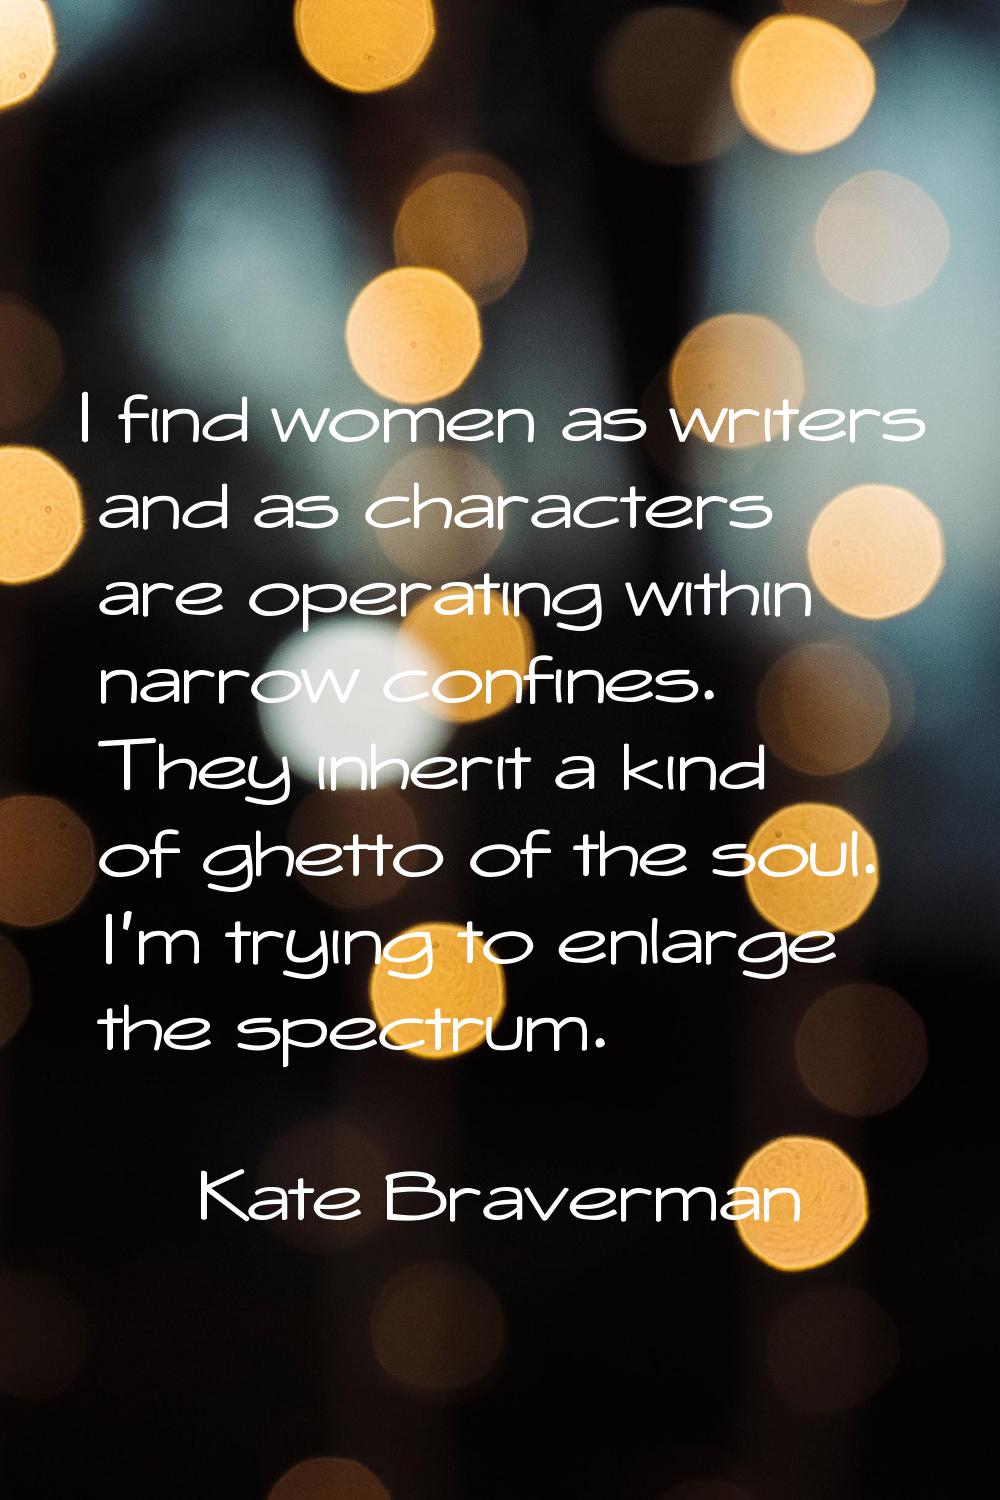 I find women as writers and as characters are operating within narrow confines. They inherit a kind